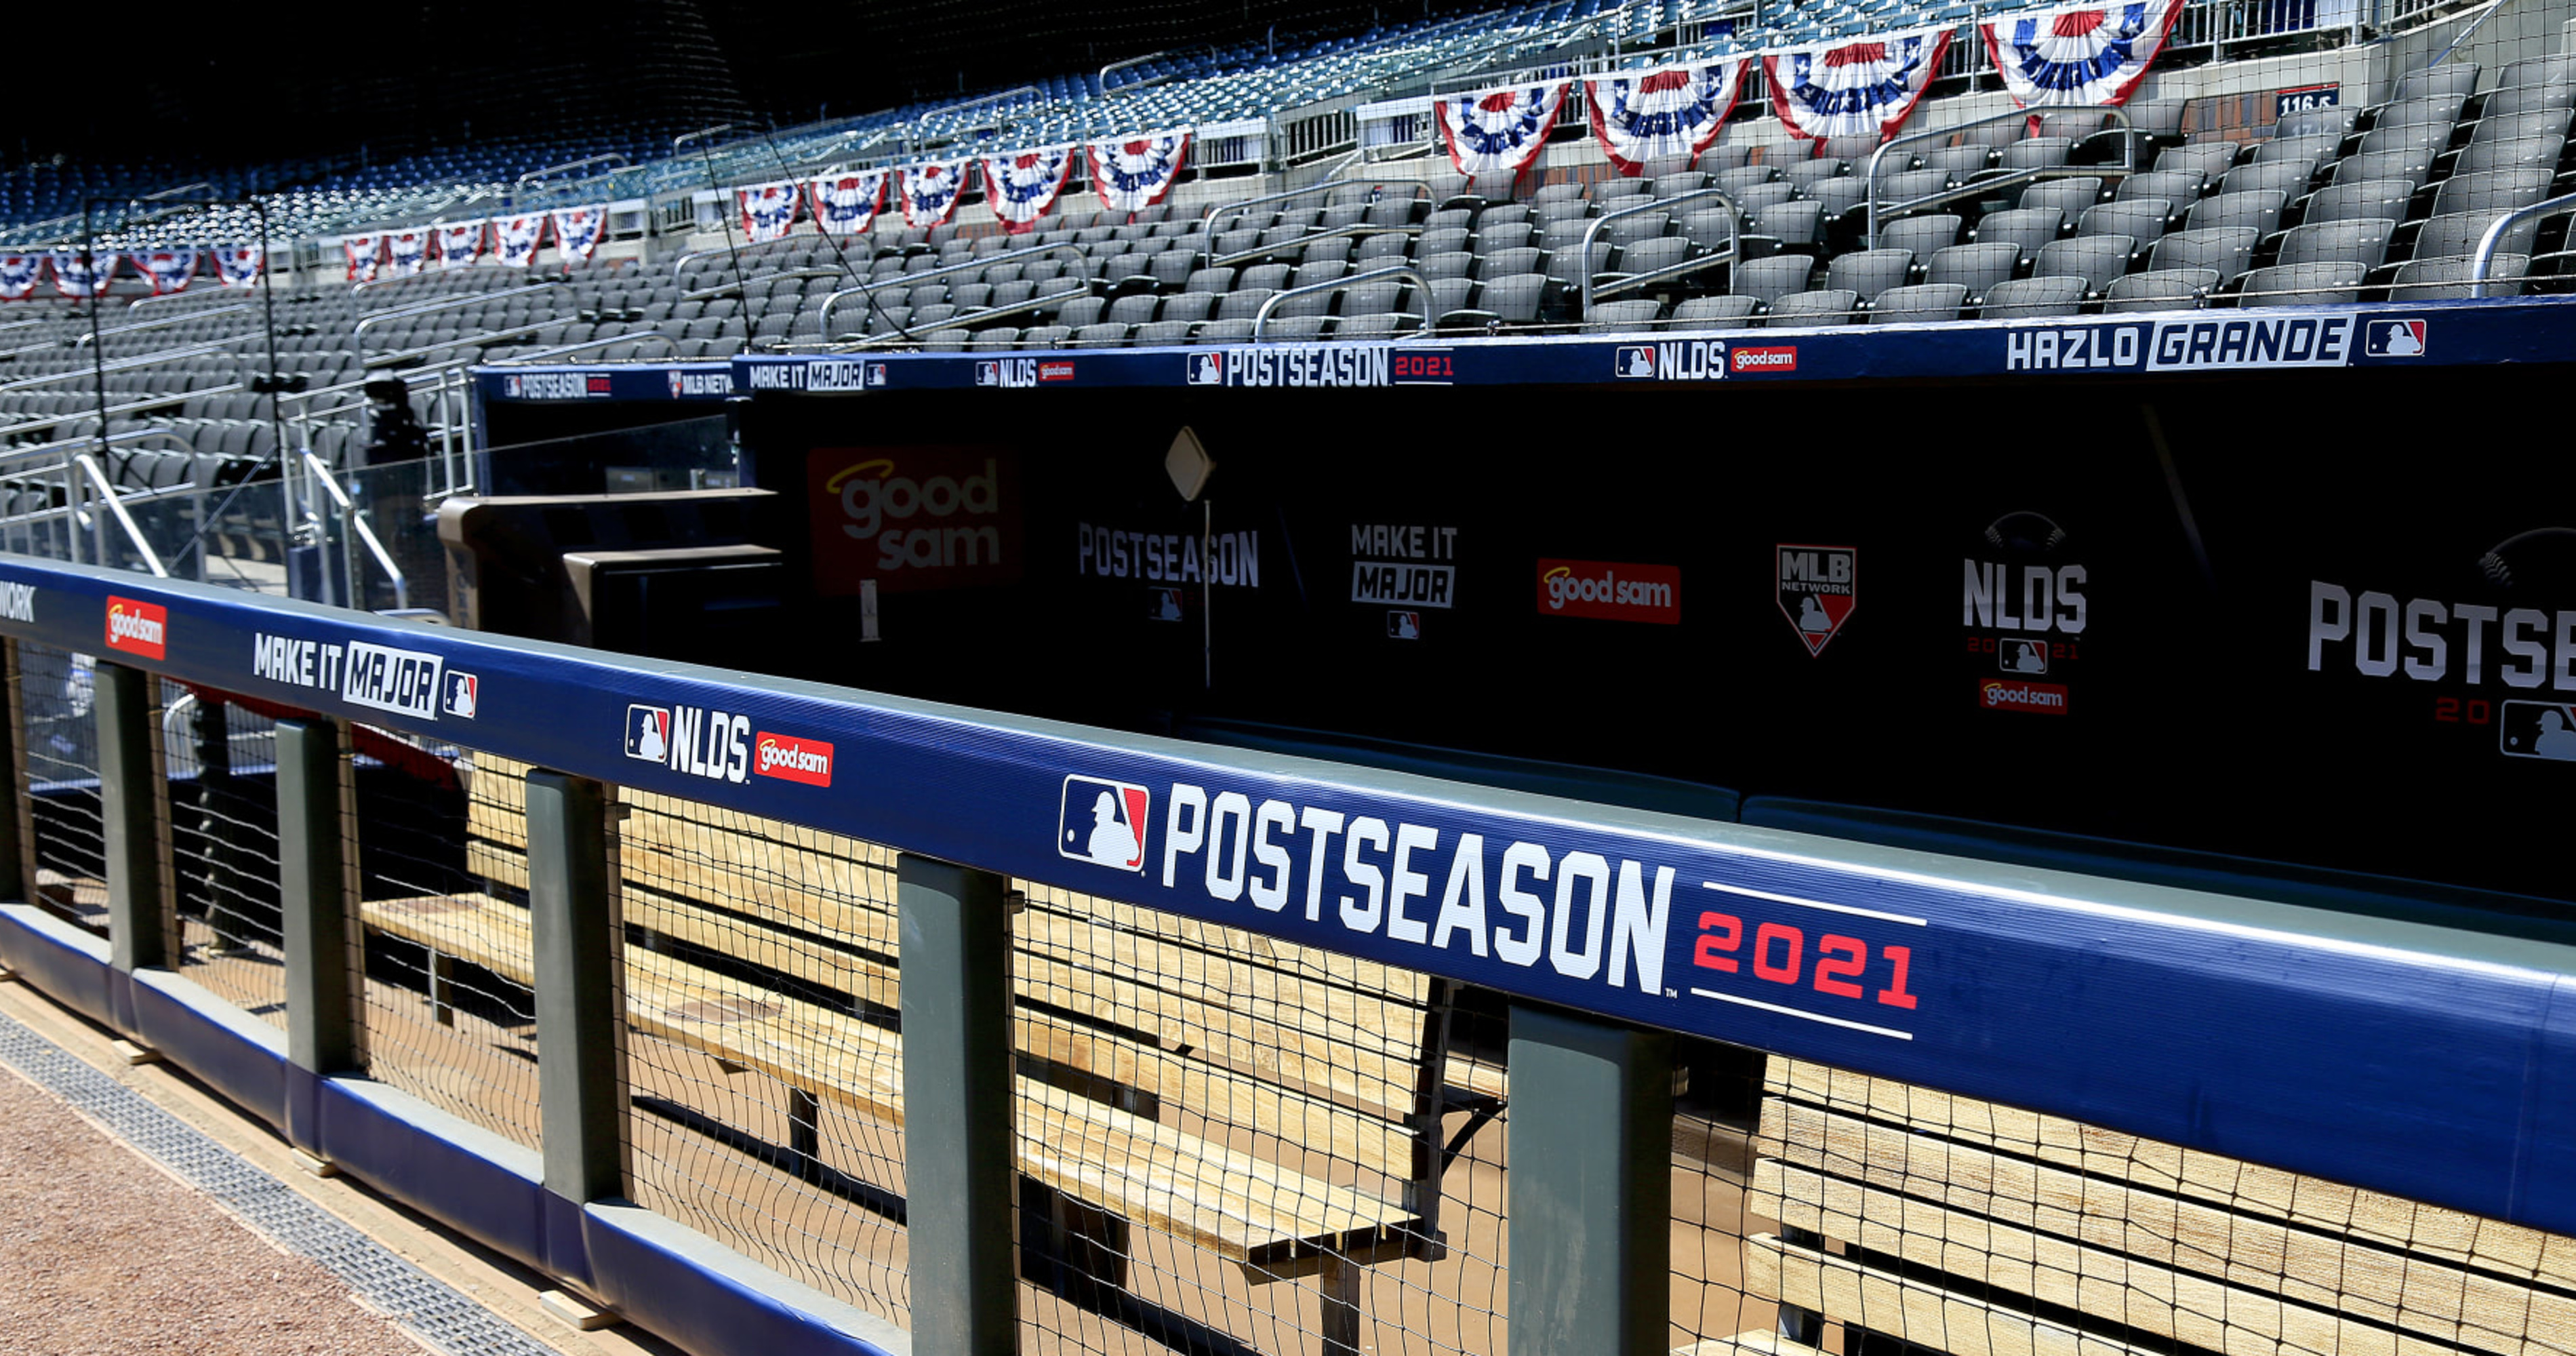 MLB playoff schedule 2022: Full bracket, dates, times, TV channels